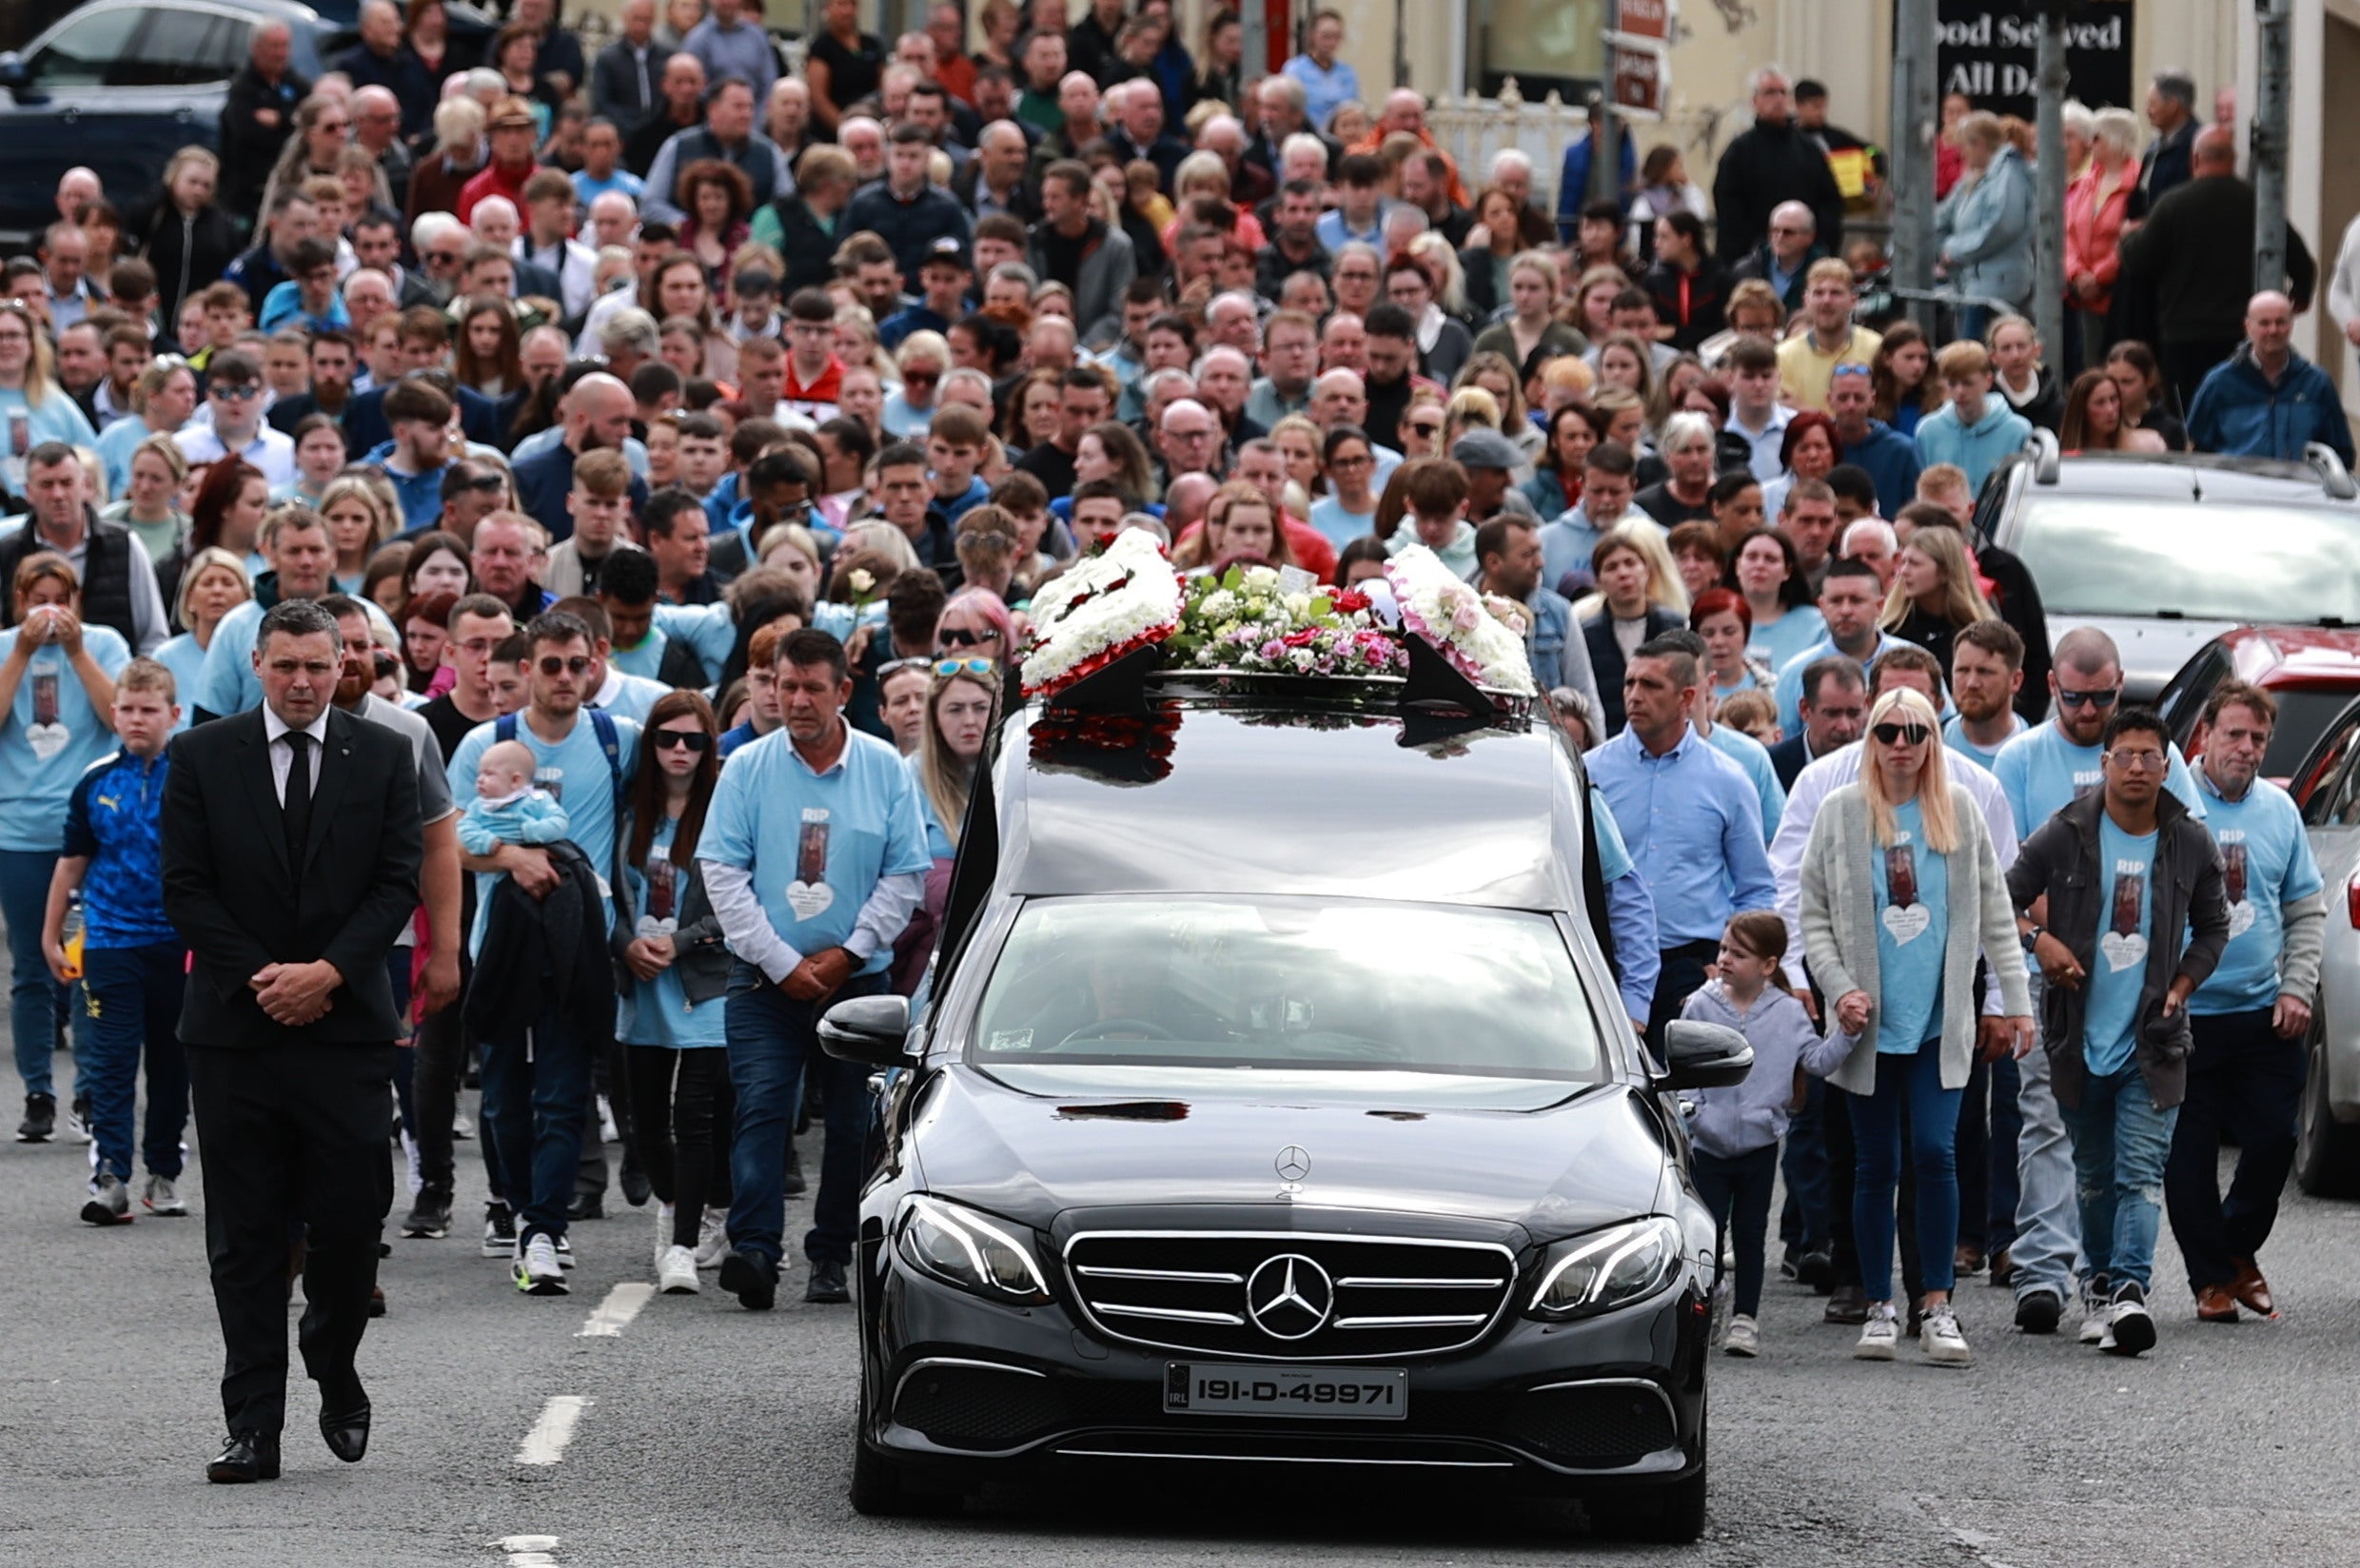 Huge crowds turn out for the funeral procession of Kiea McCann as it makes its way to the Sacred Heart Chapel in Clones, Co. Monaghan for her funeral